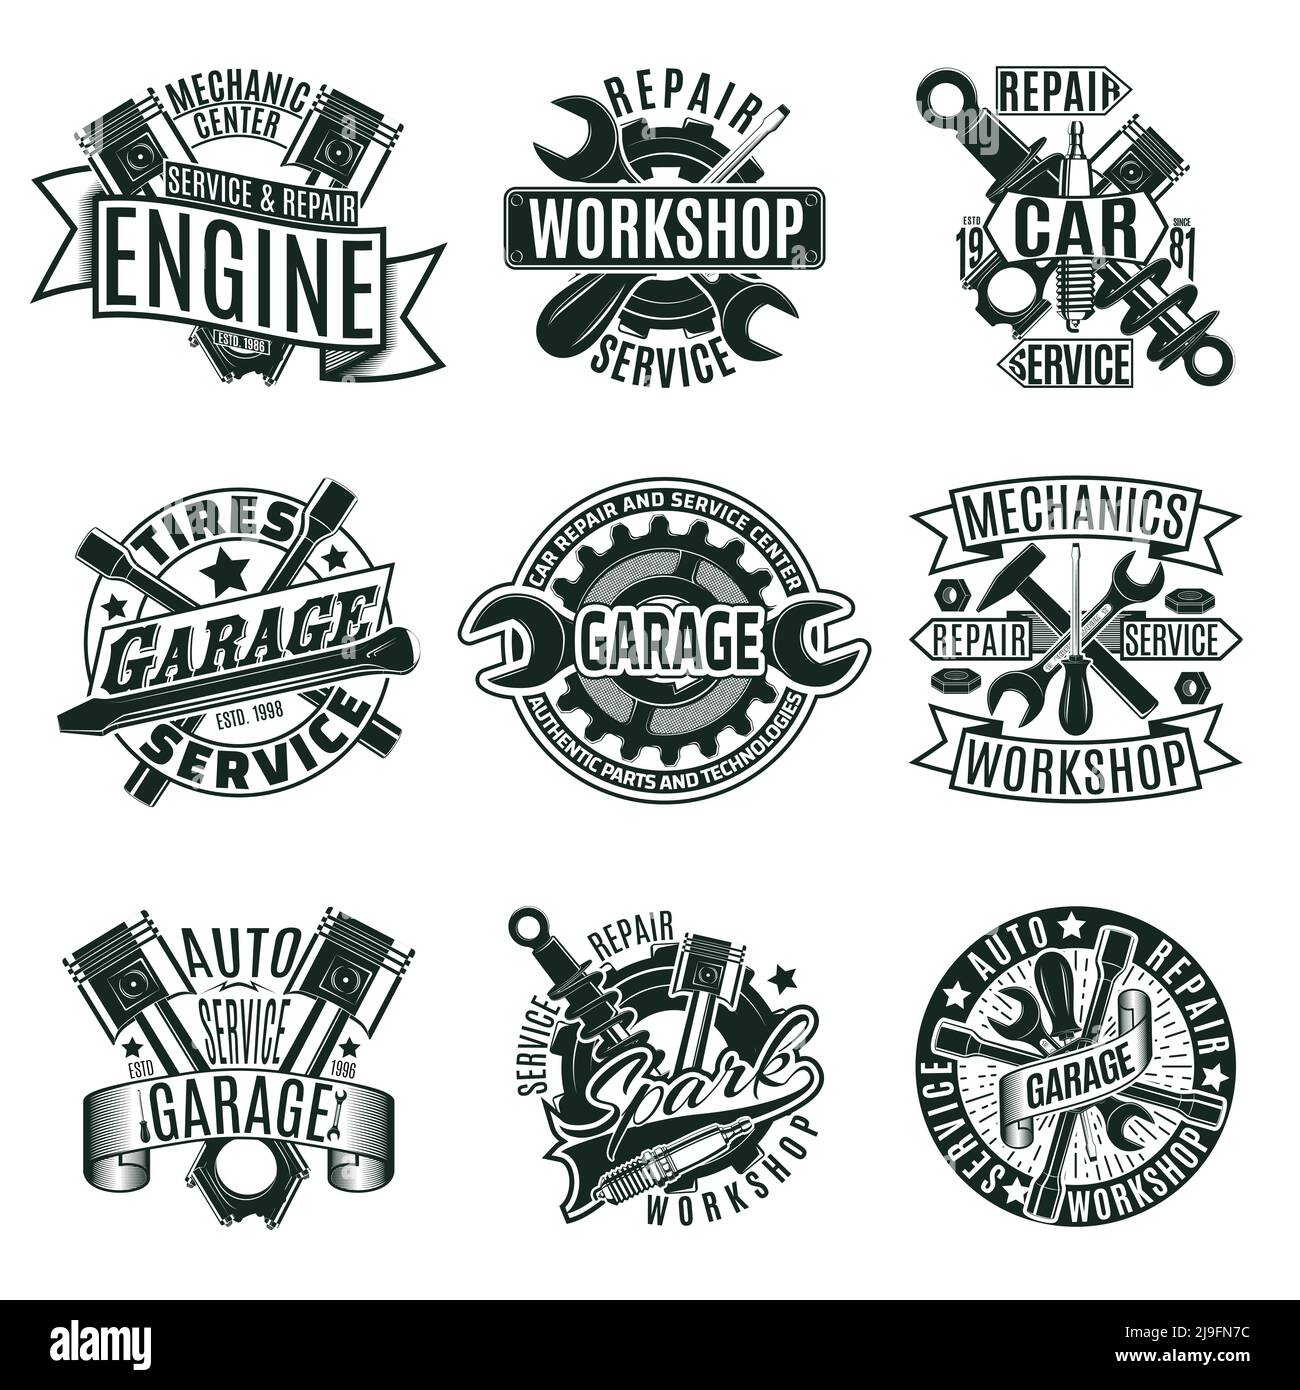 Monochrome car repair service logos set with mechanic tools and ...